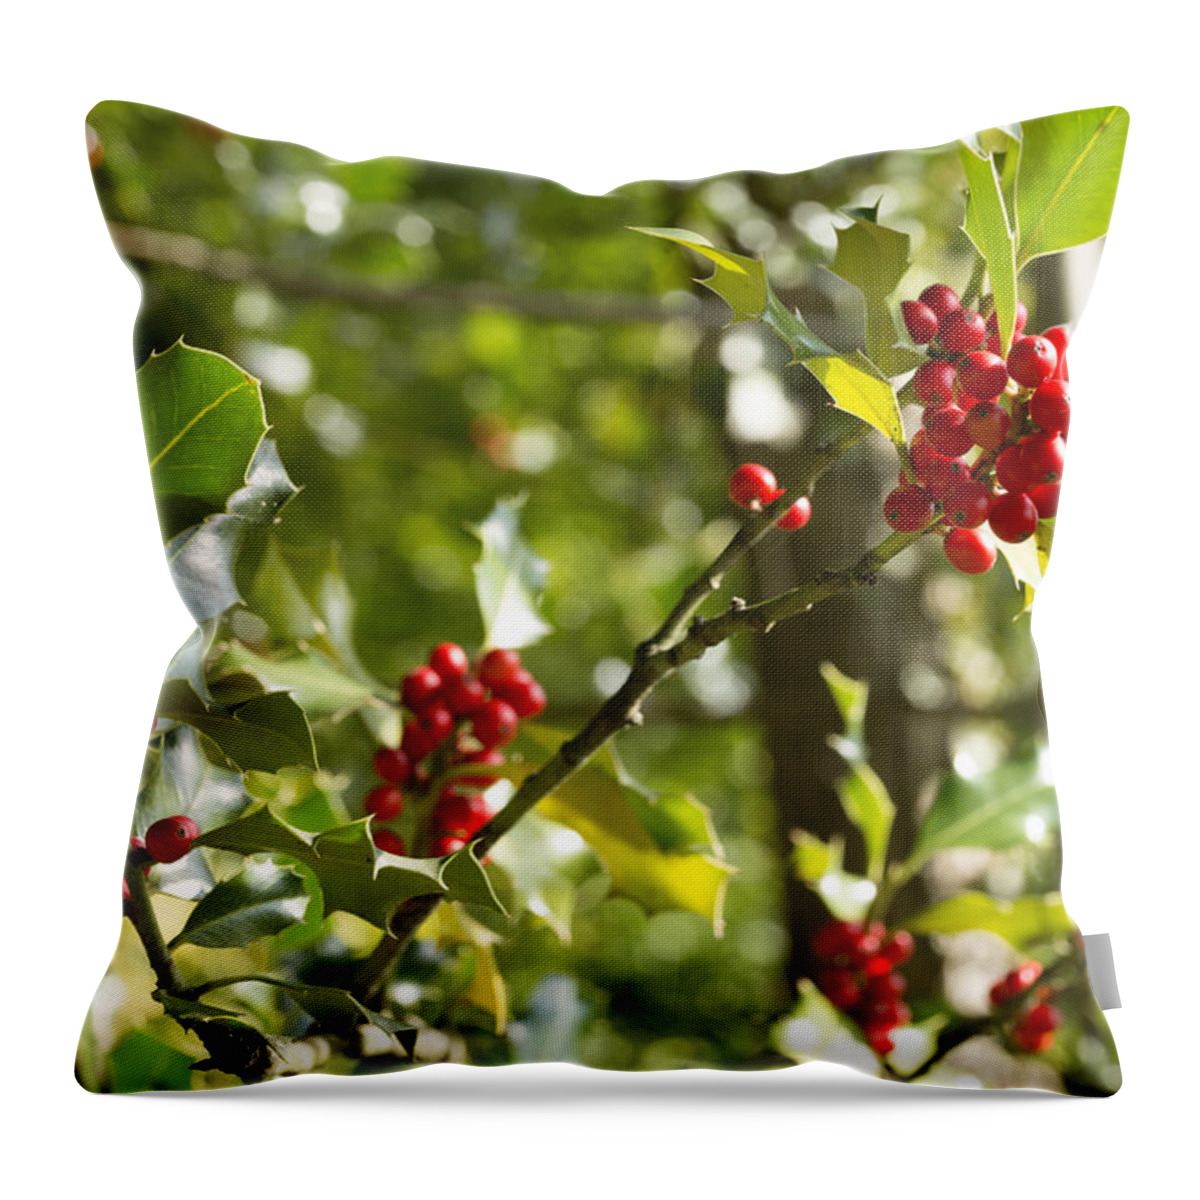 Holly Throw Pillow featuring the photograph Holly With Berries by Chevy Fleet